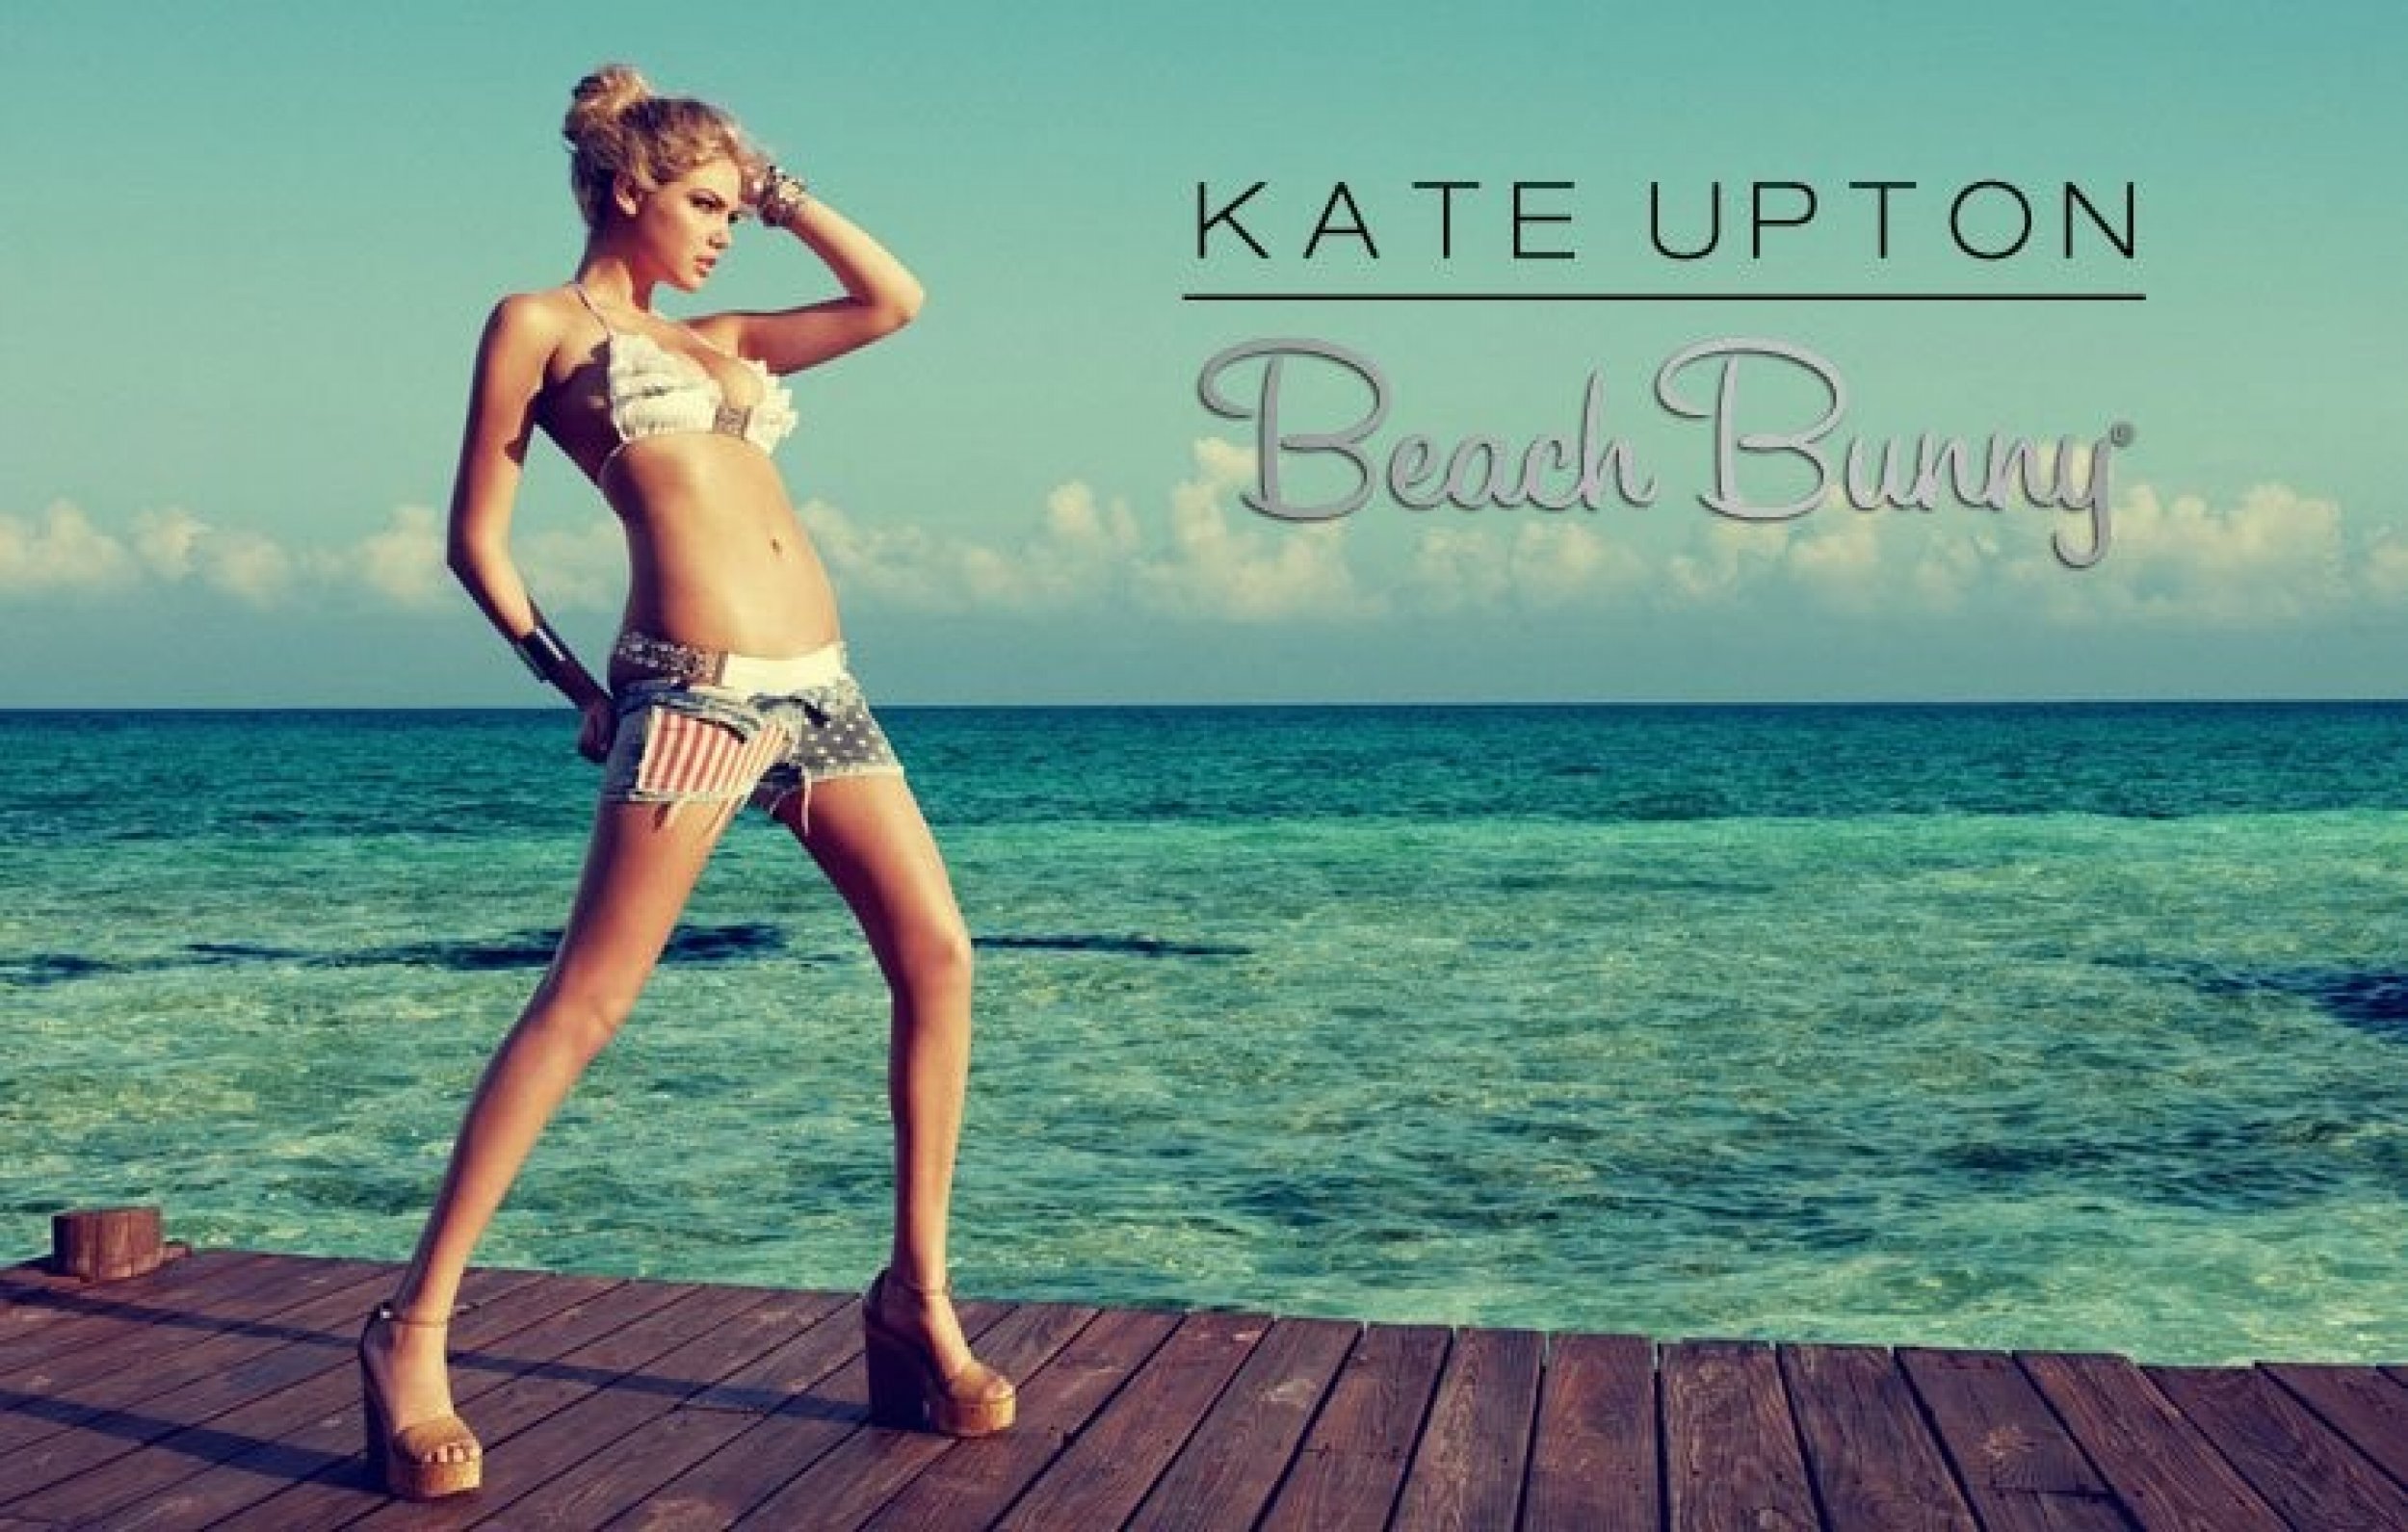 Sports Illustrated swimsuit cover model Kate Upton has designed her own line of bikinis in collaboration with Beach Bunny swimwear.